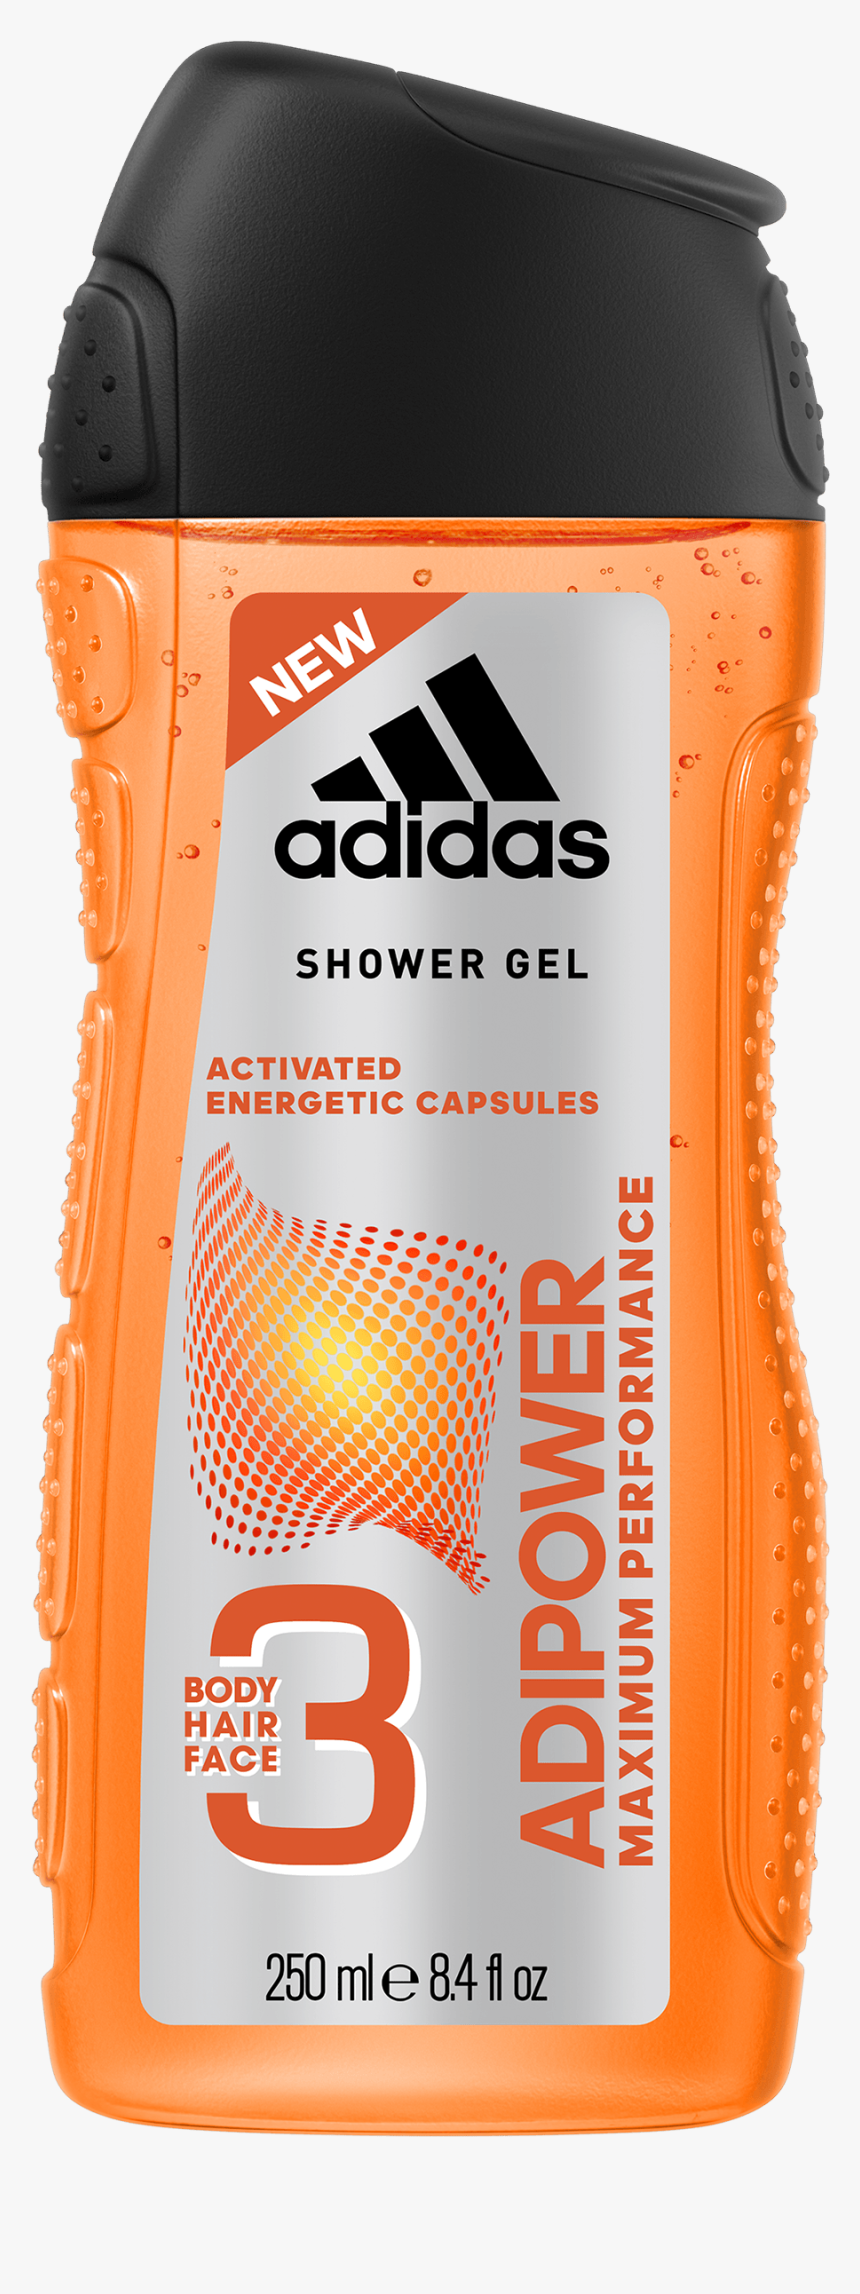 Adipower 3in1 Body, Hair And Face Shower Gel For Him - Adidas Shower Gel Adipower, HD Png Download, Free Download